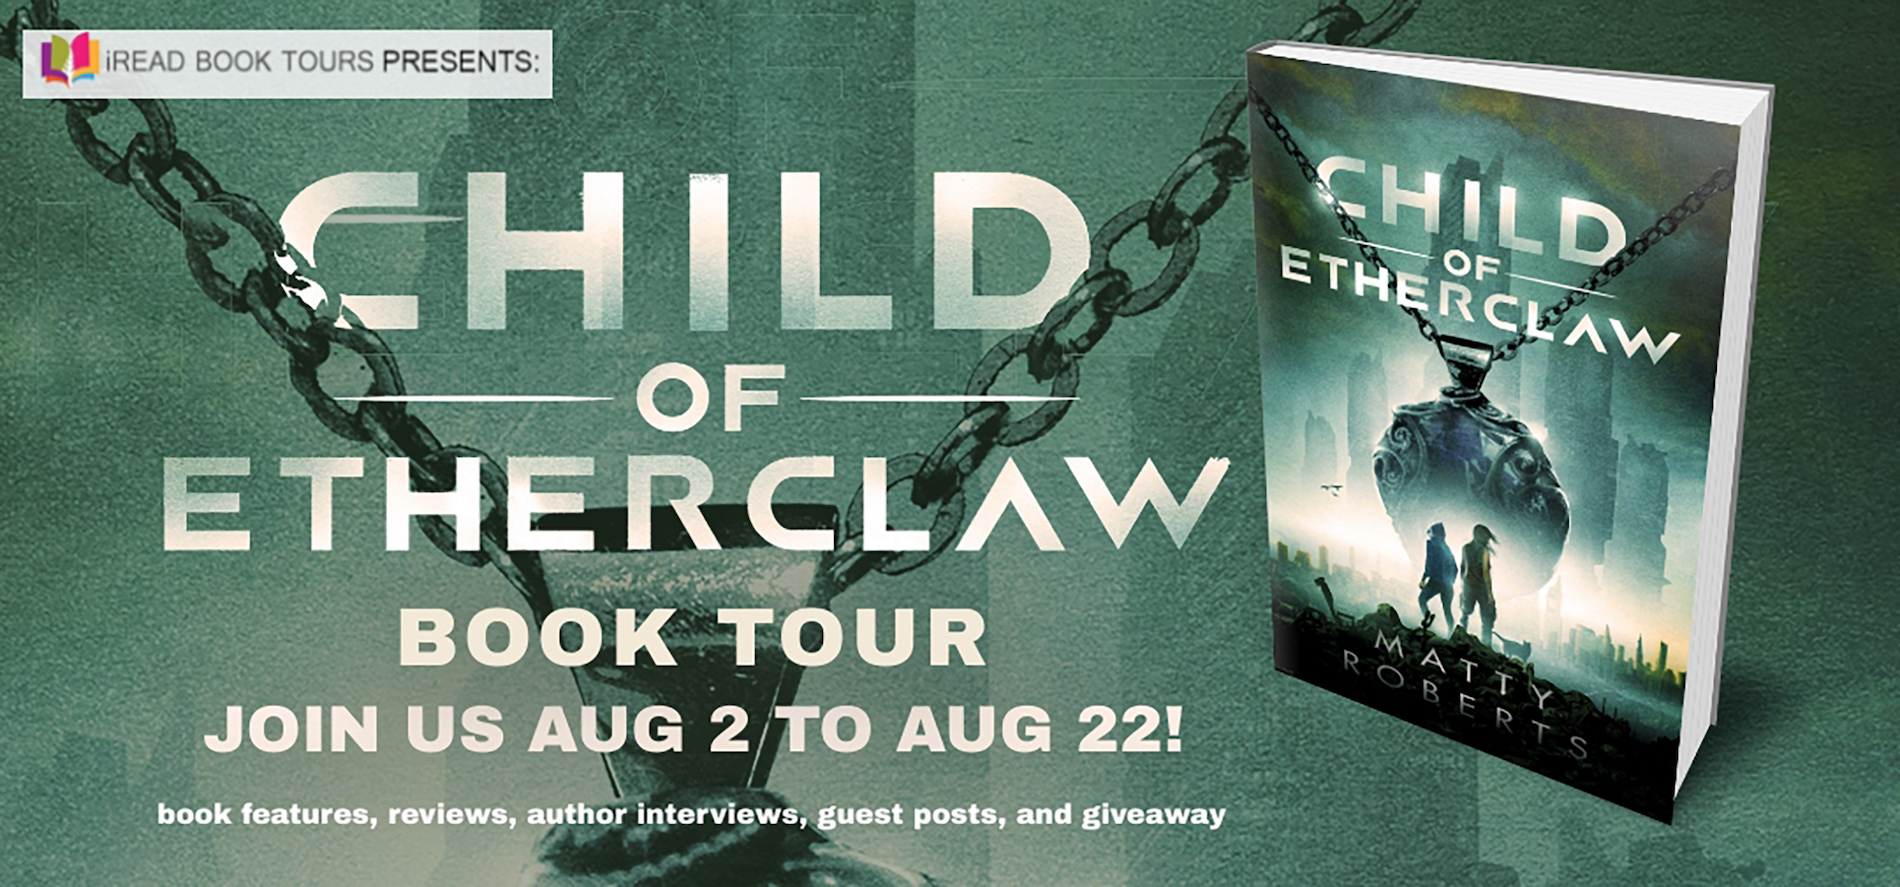 CHILD OF ETHERCLAW TOUR BANNER